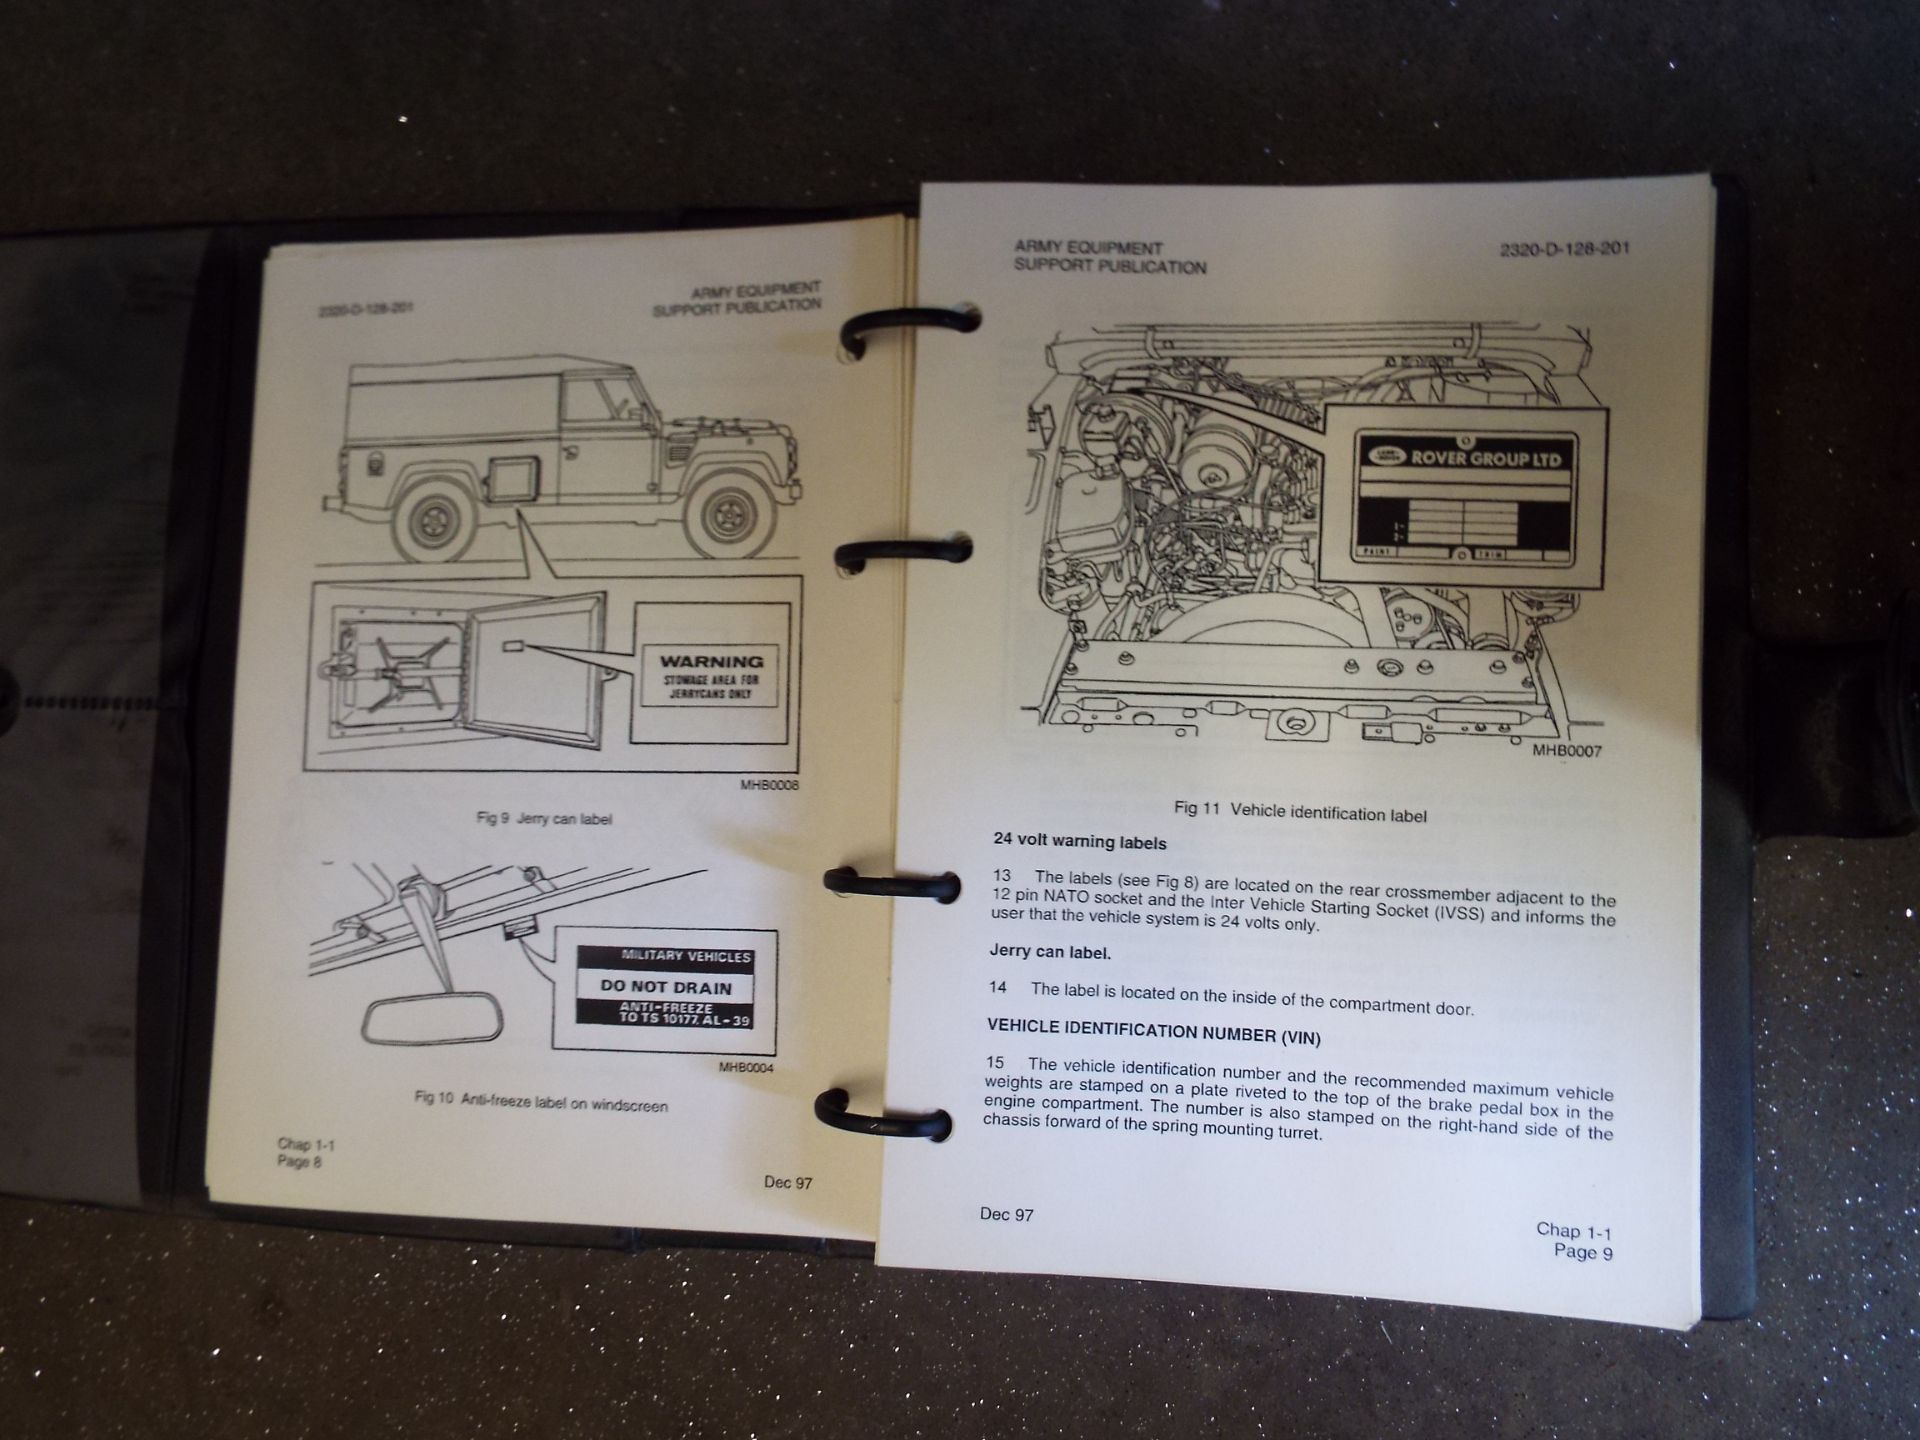 Extremely Rare Military Land Rover WOLF Operating Manual - Image 4 of 10